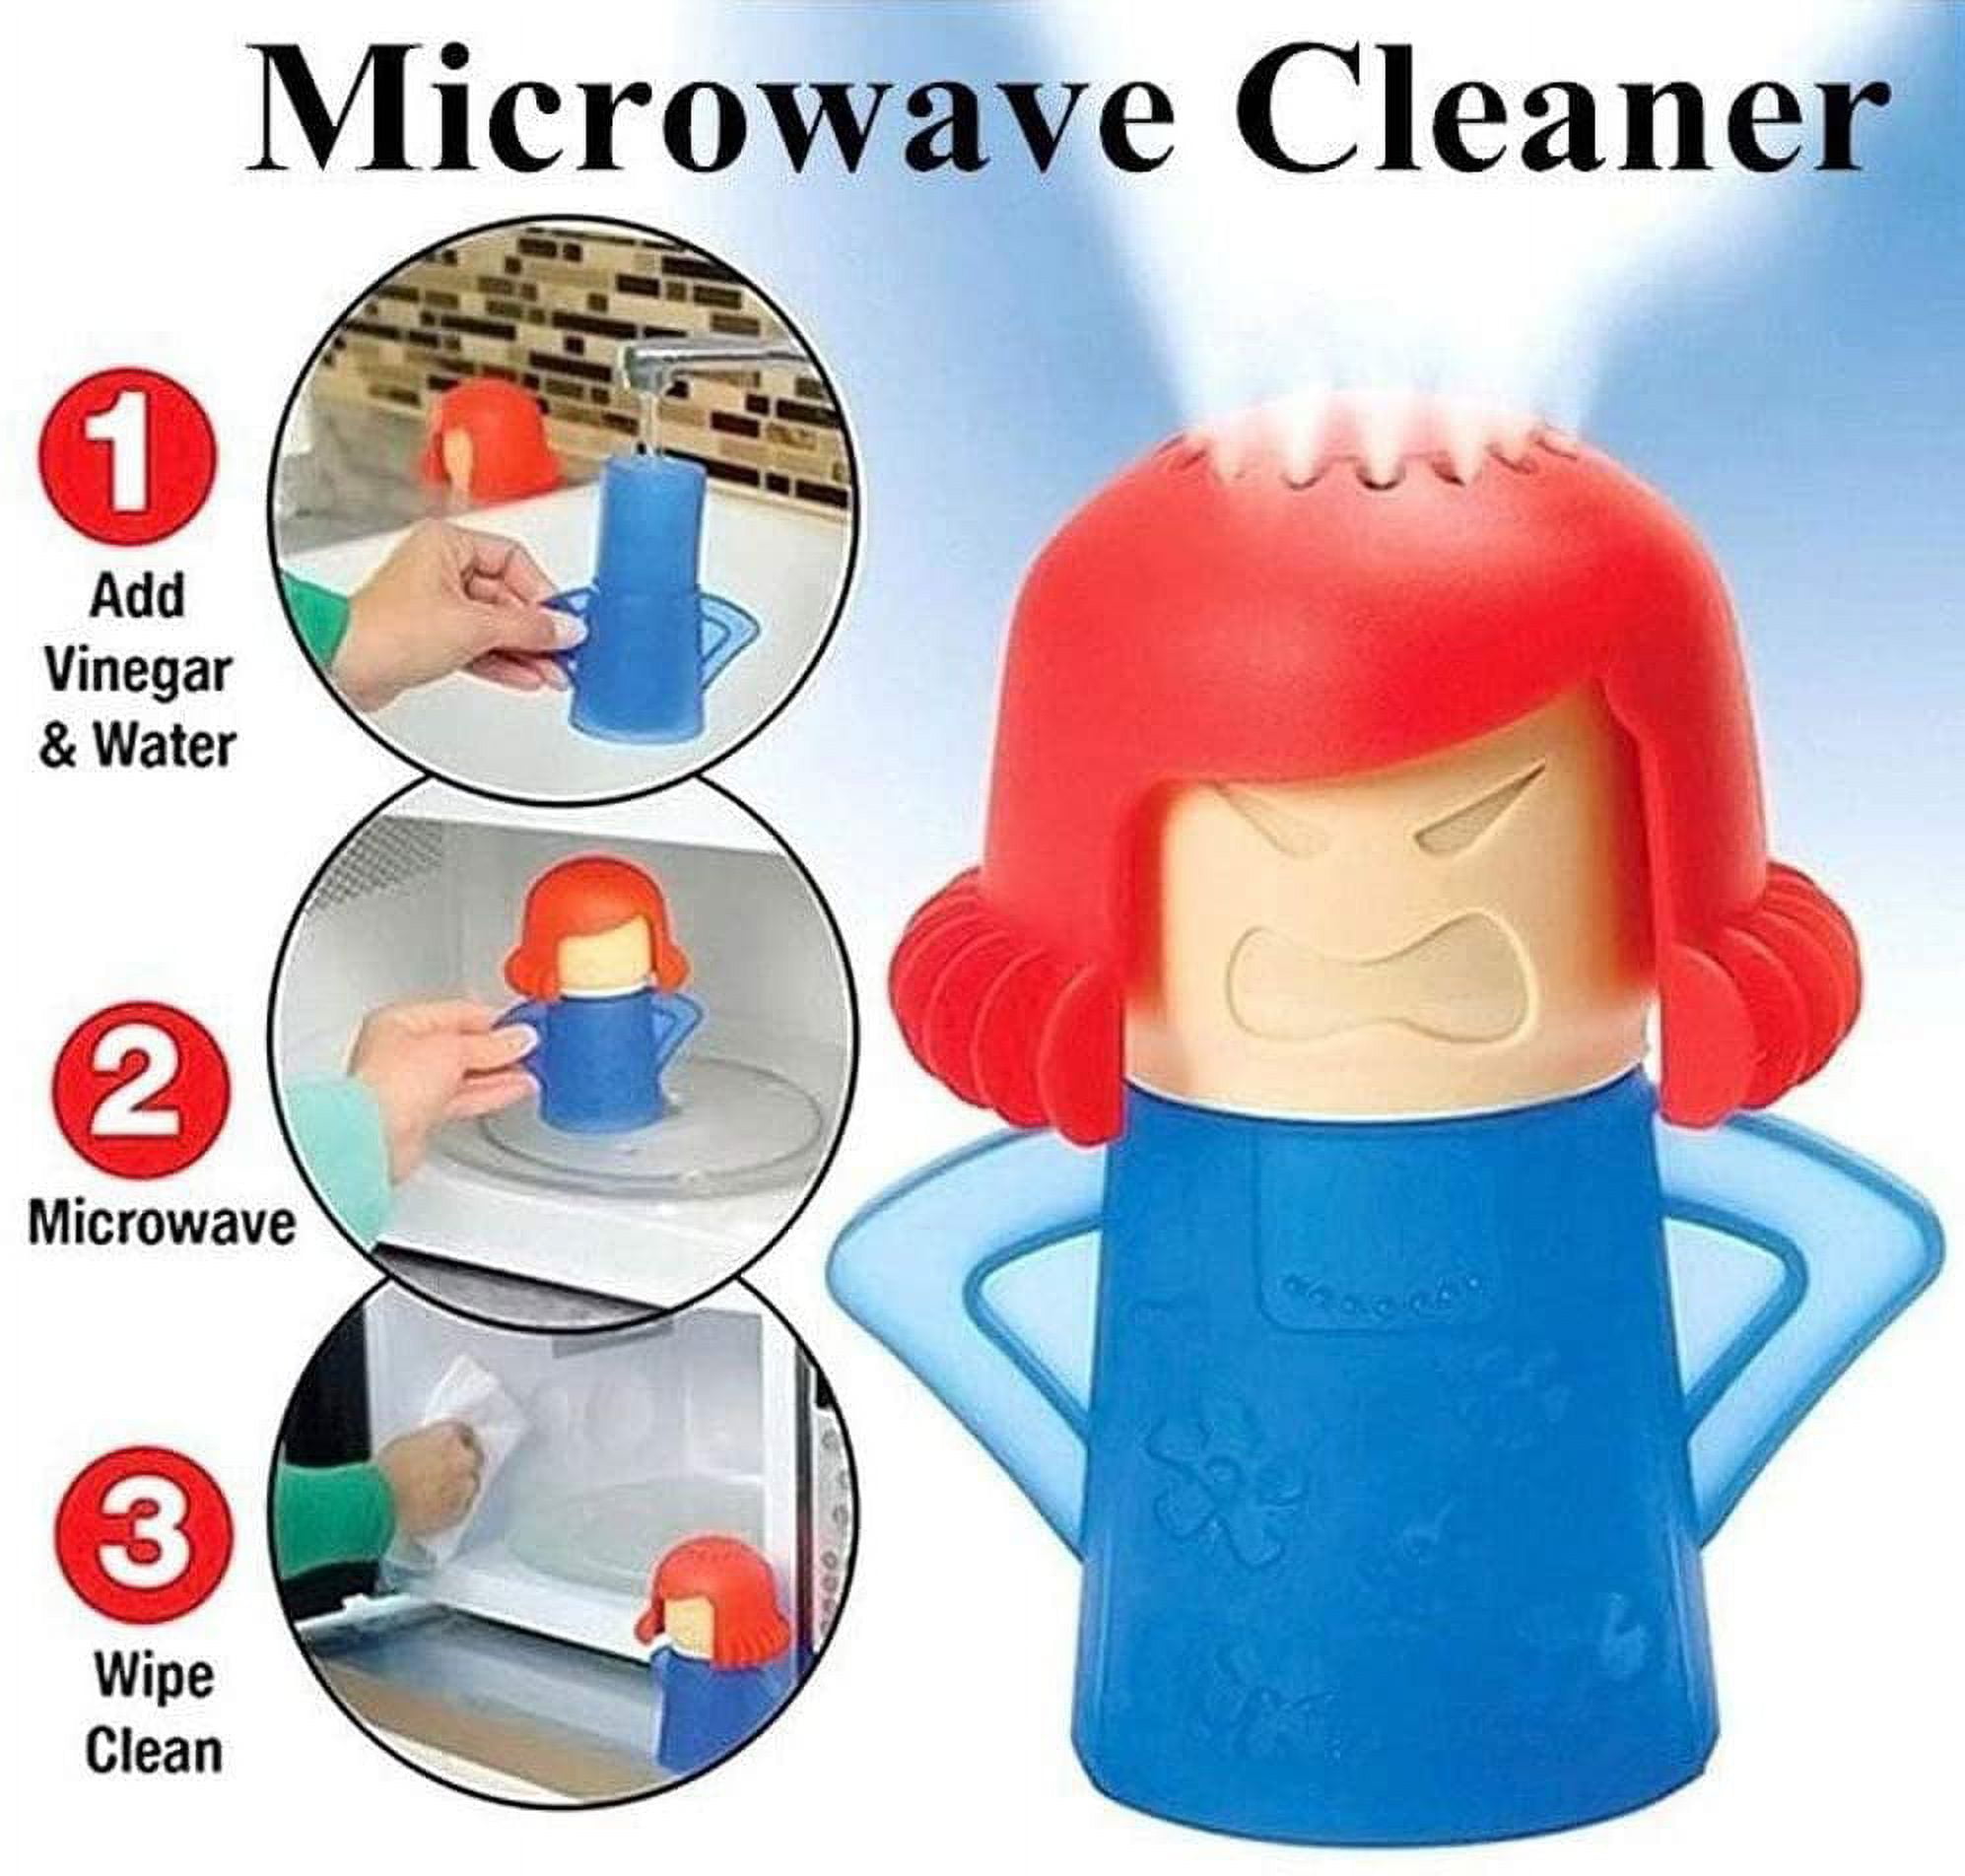 GUC Angry Mom Microwave Cleaner and Cool Mom Fridge Odor Absorber